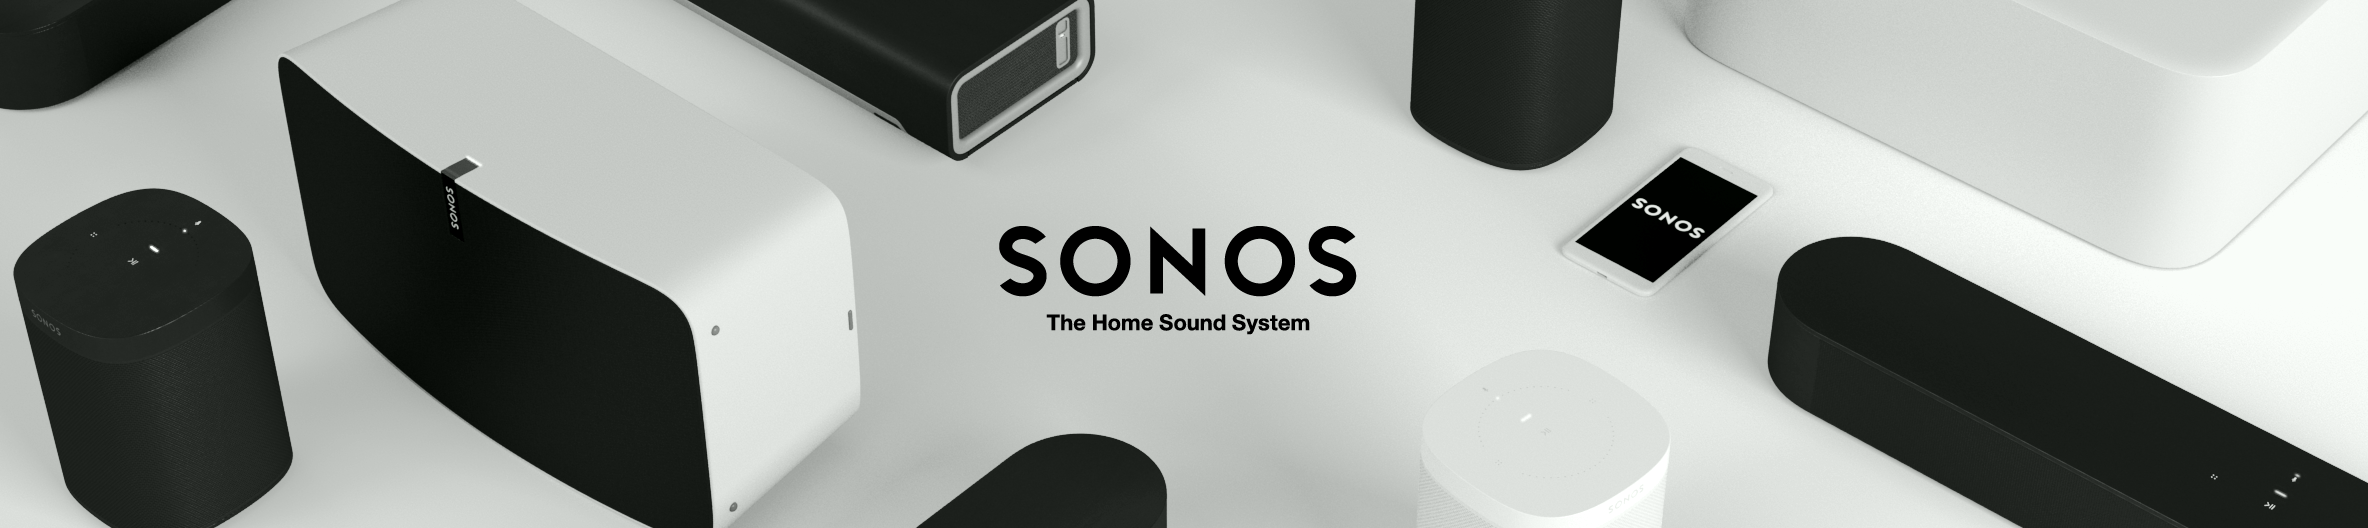 let at håndtere cigaret Bitterhed 10 Cool Things You Didn't Know You Could Do With Sonos in 2020 | Smart Home  Sounds